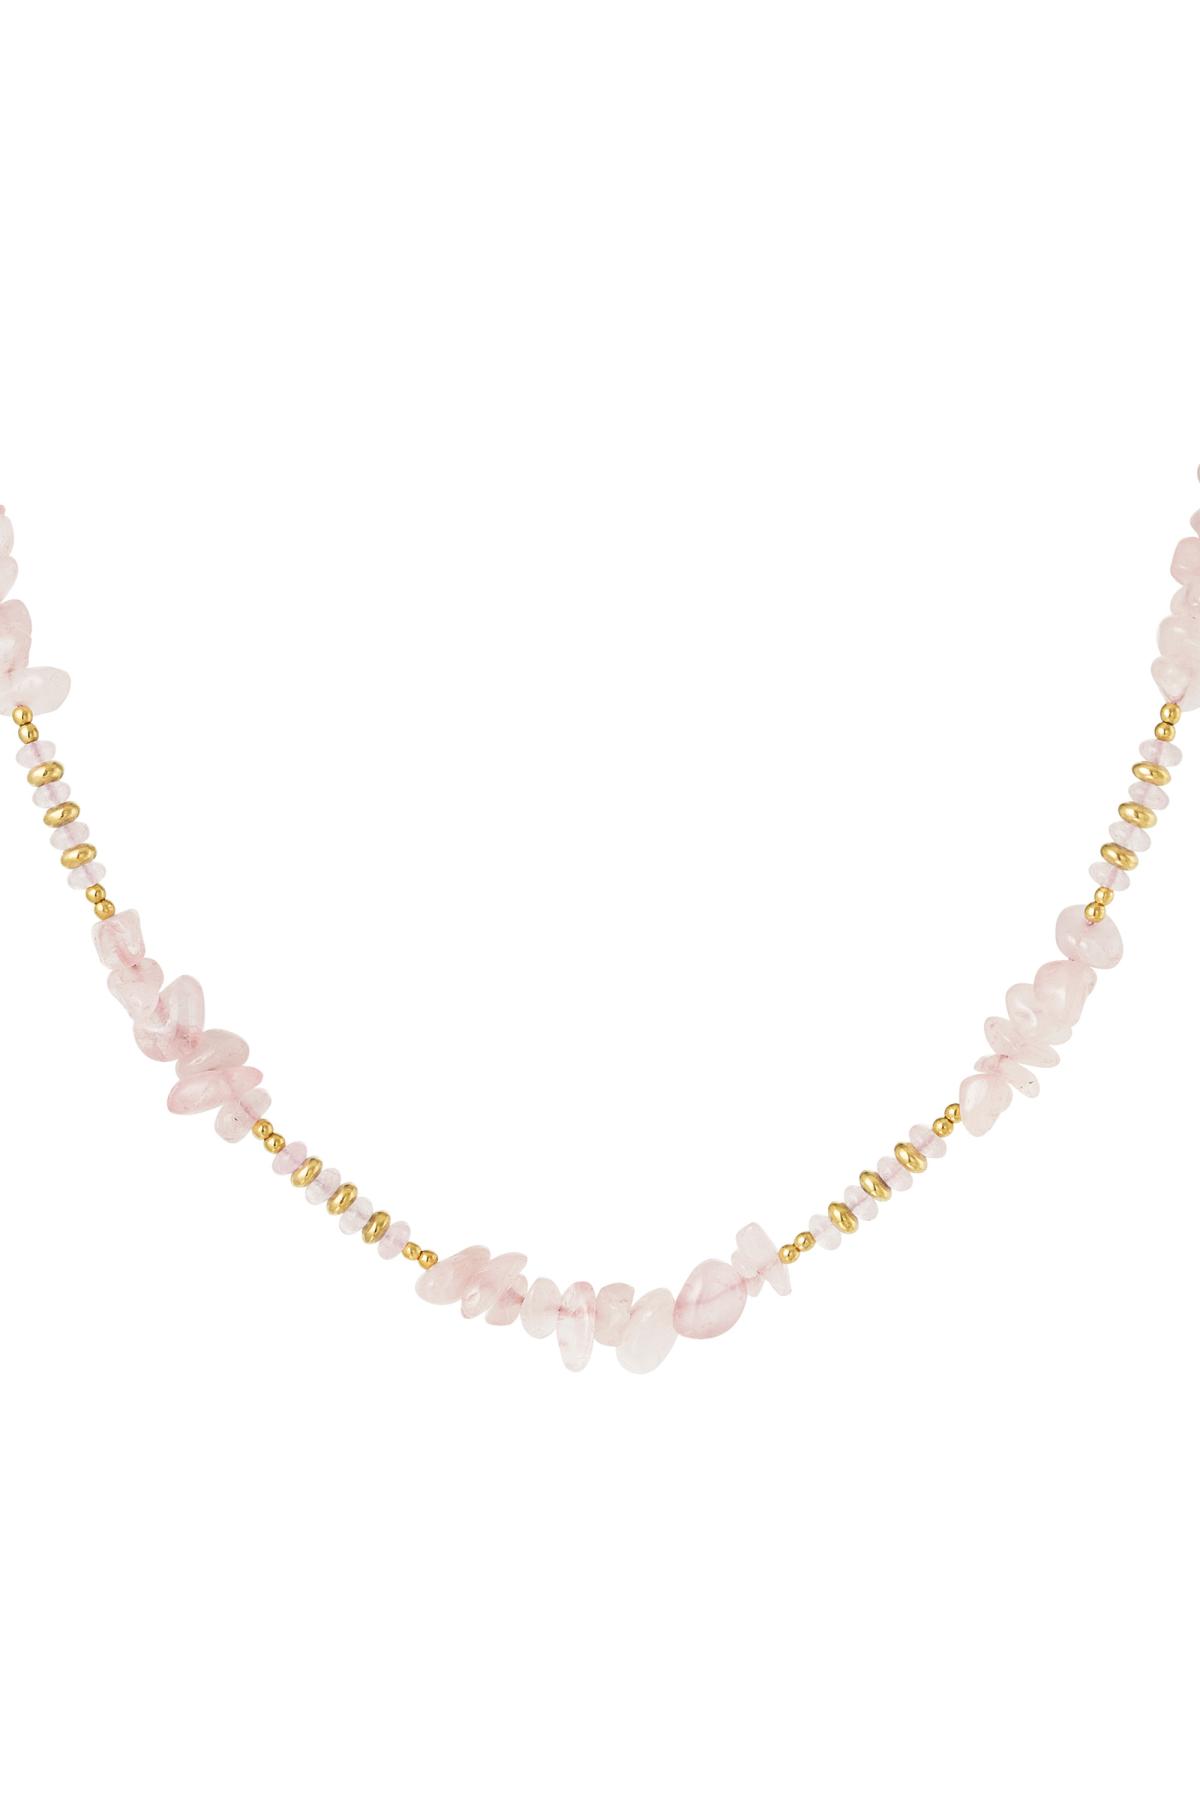 Necklace different beads - Natural stones collection Pink &amp; Gold